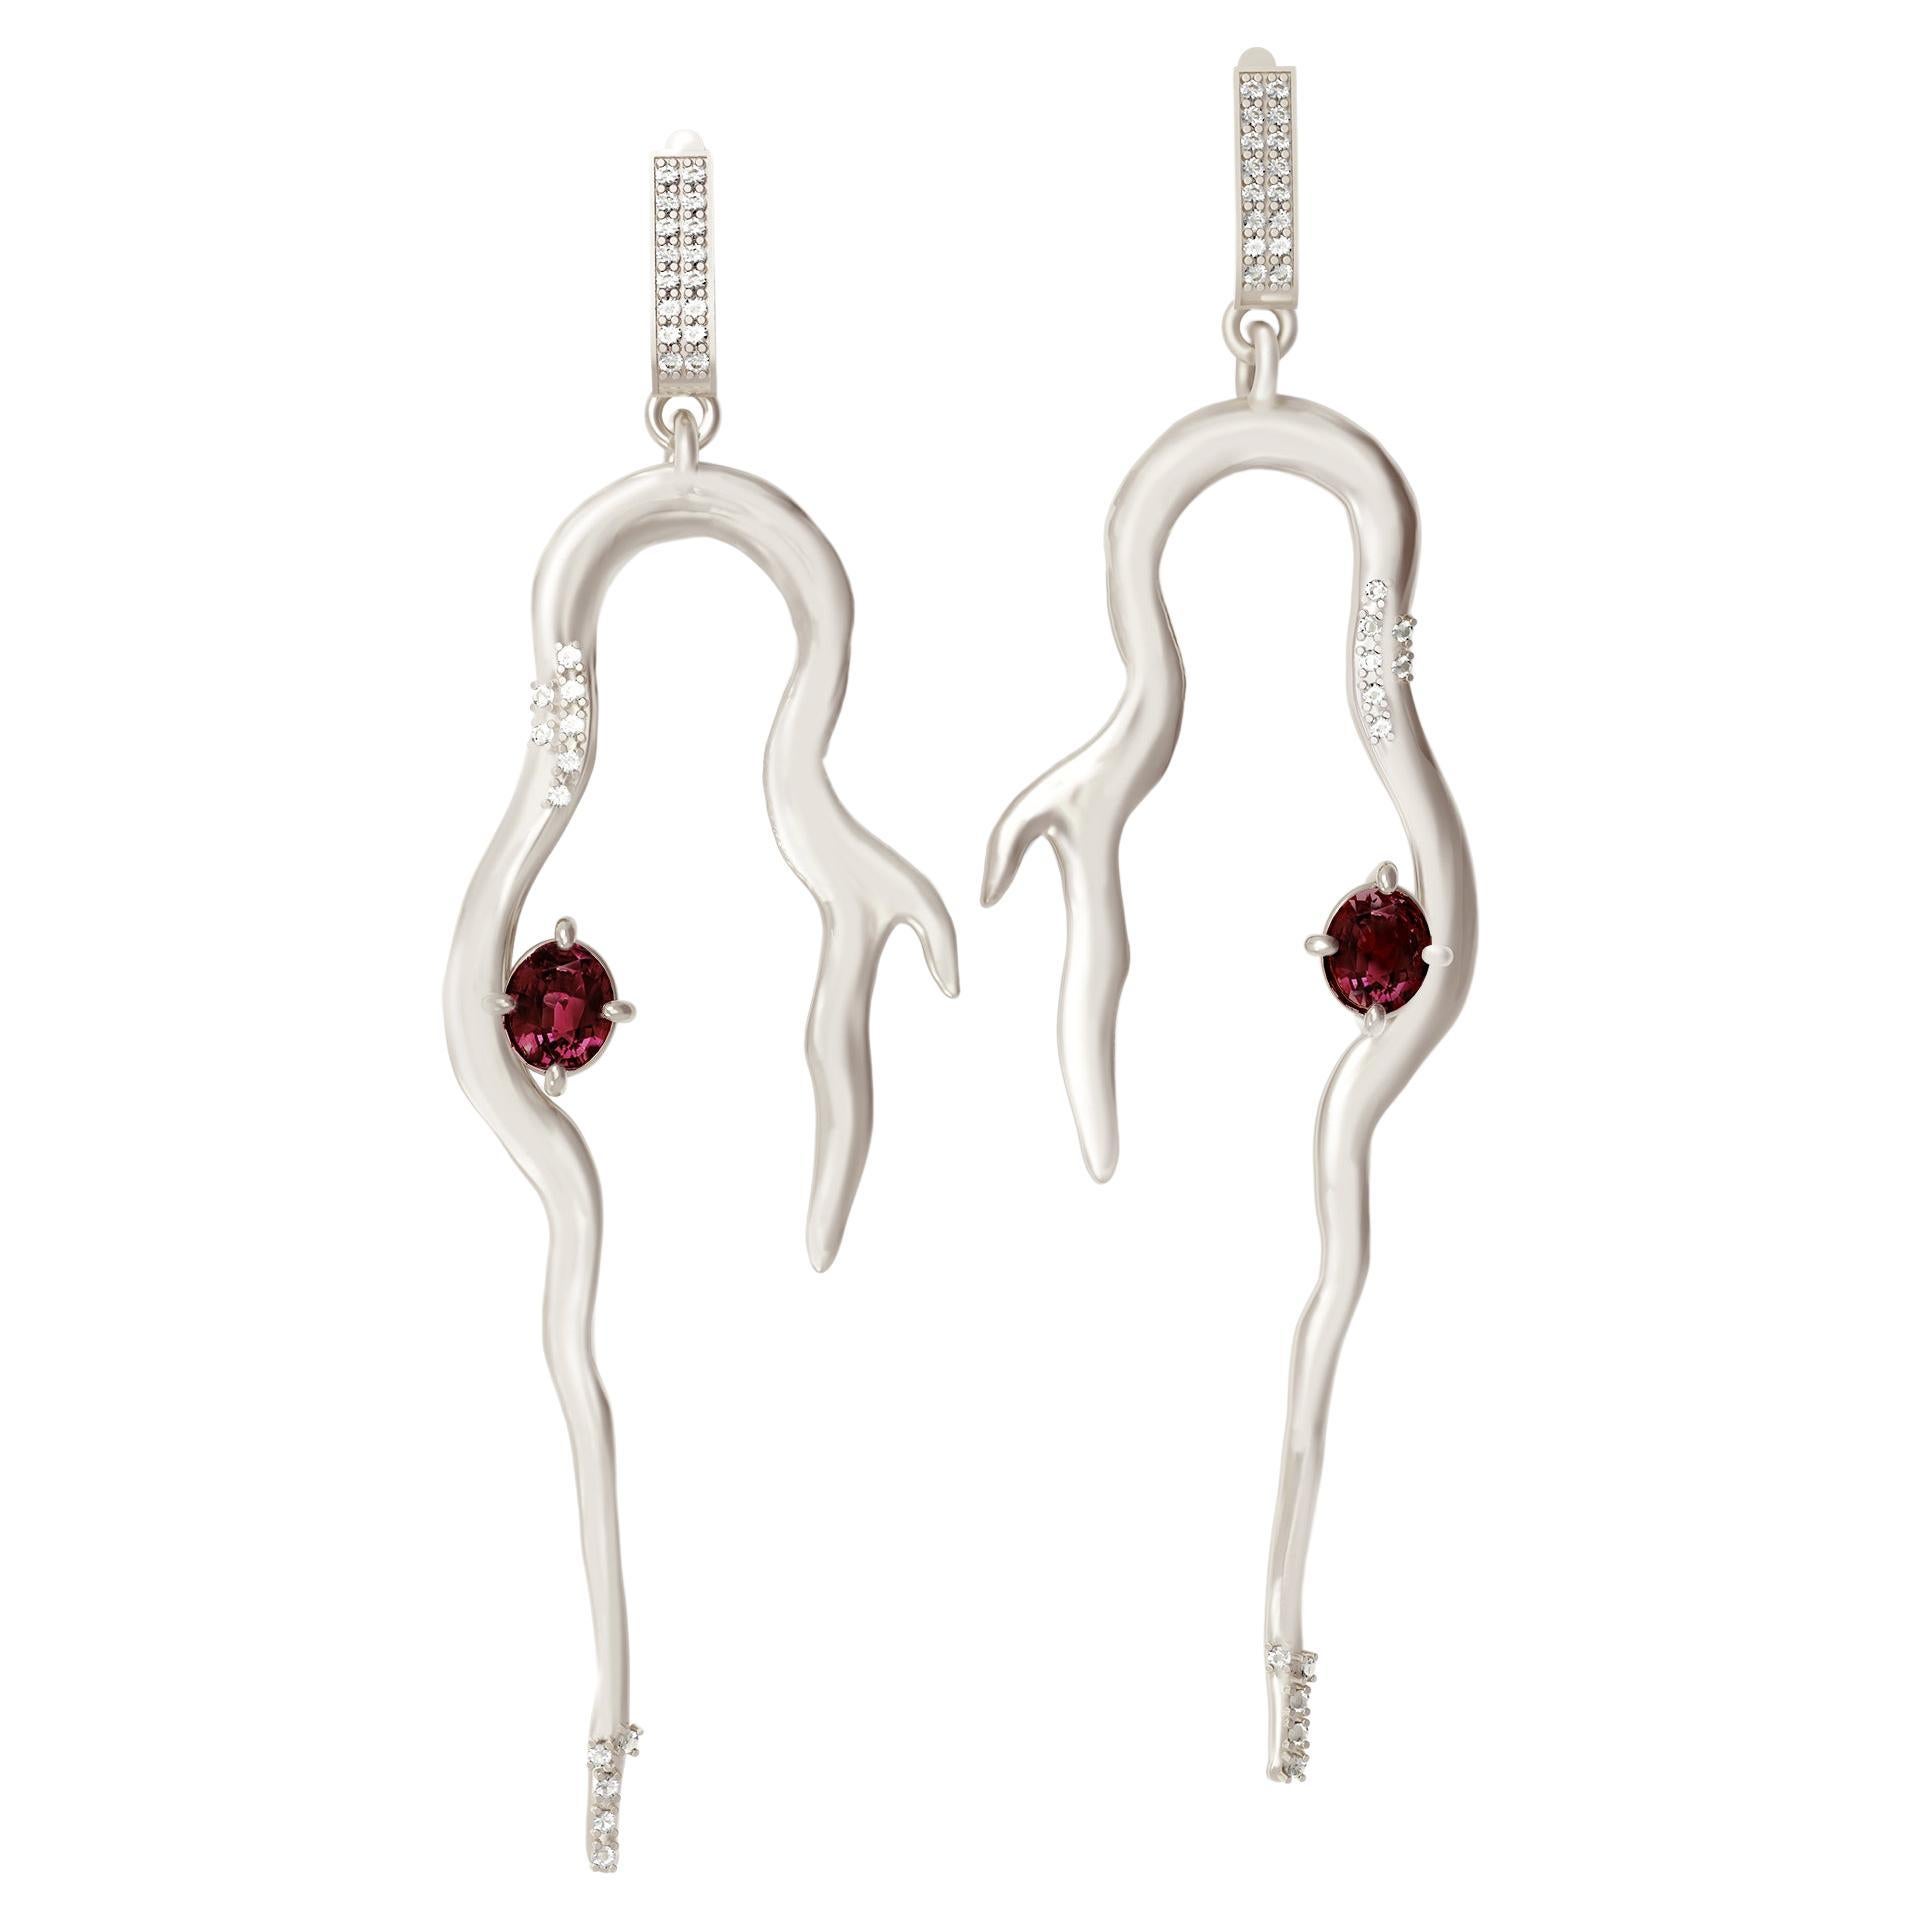 White Gold Contemporary Earrings with Sapphire and Fifty Six Diamonds